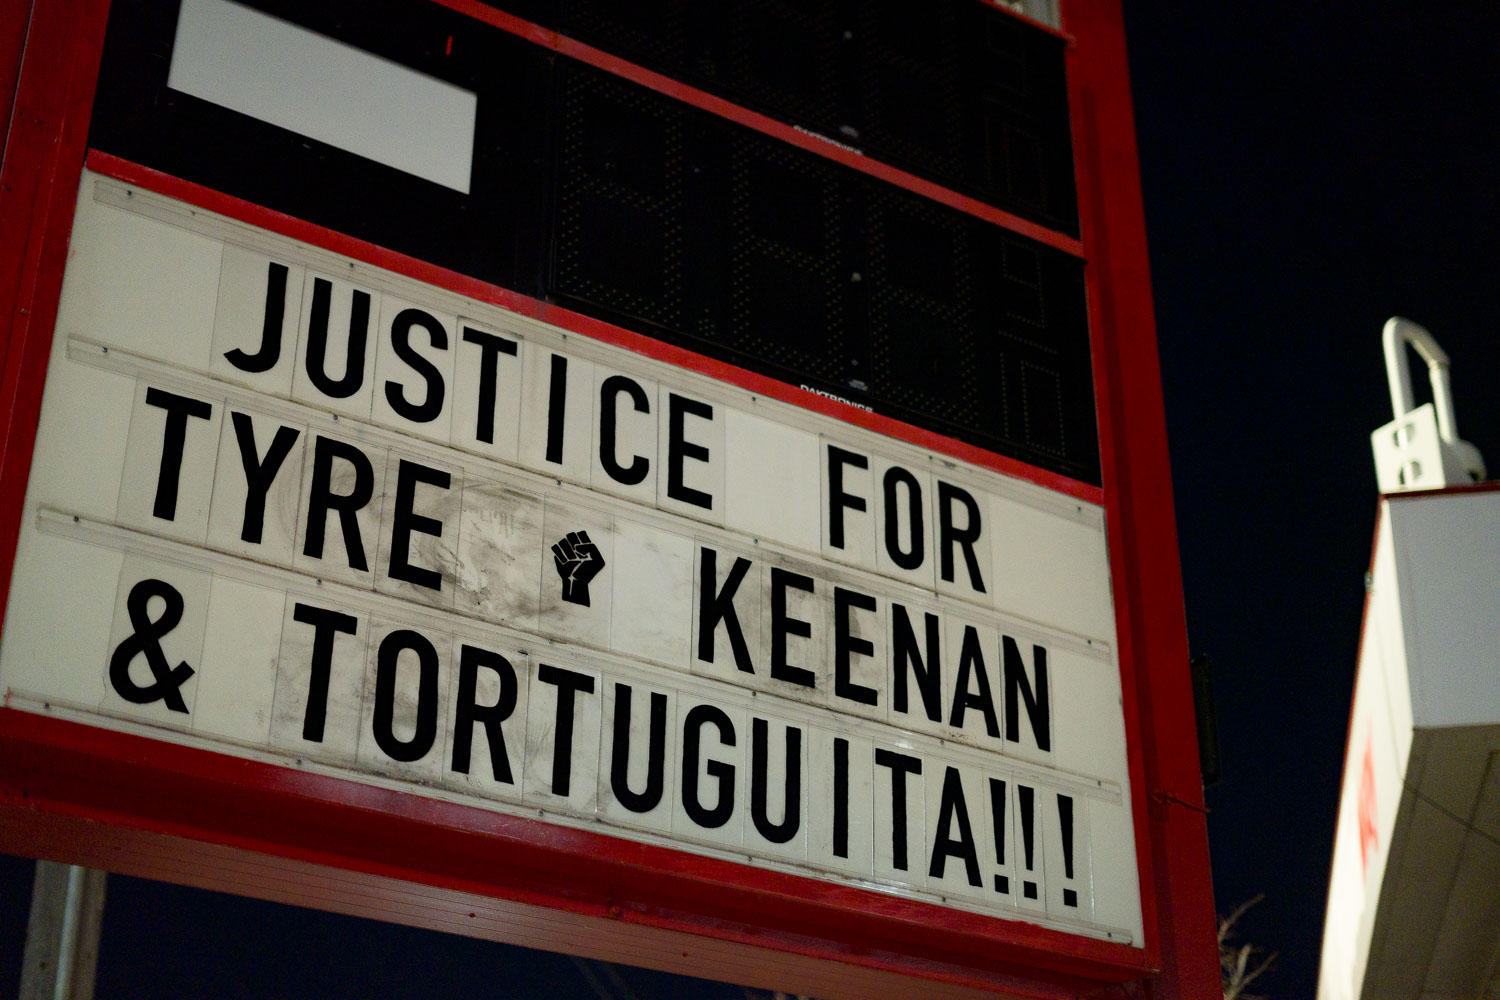 The signage at "The Peoples Way" reading "justiec for Tyre, Keenan & Tortuguita!!!"